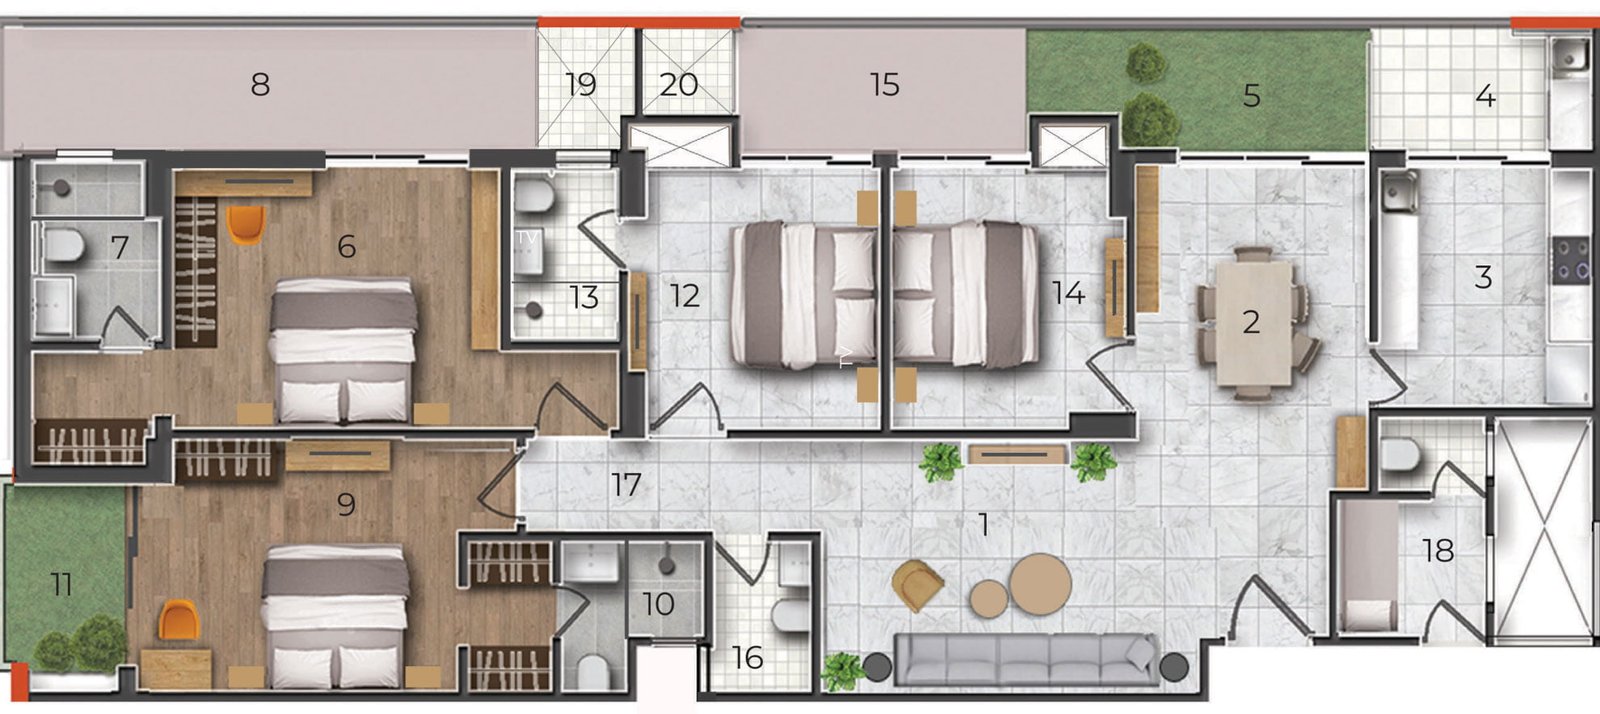 4BHK Floor plan of a 2-bedroom apartment with kitchen, living room, and bathroom. Luxury Living in Haridwar